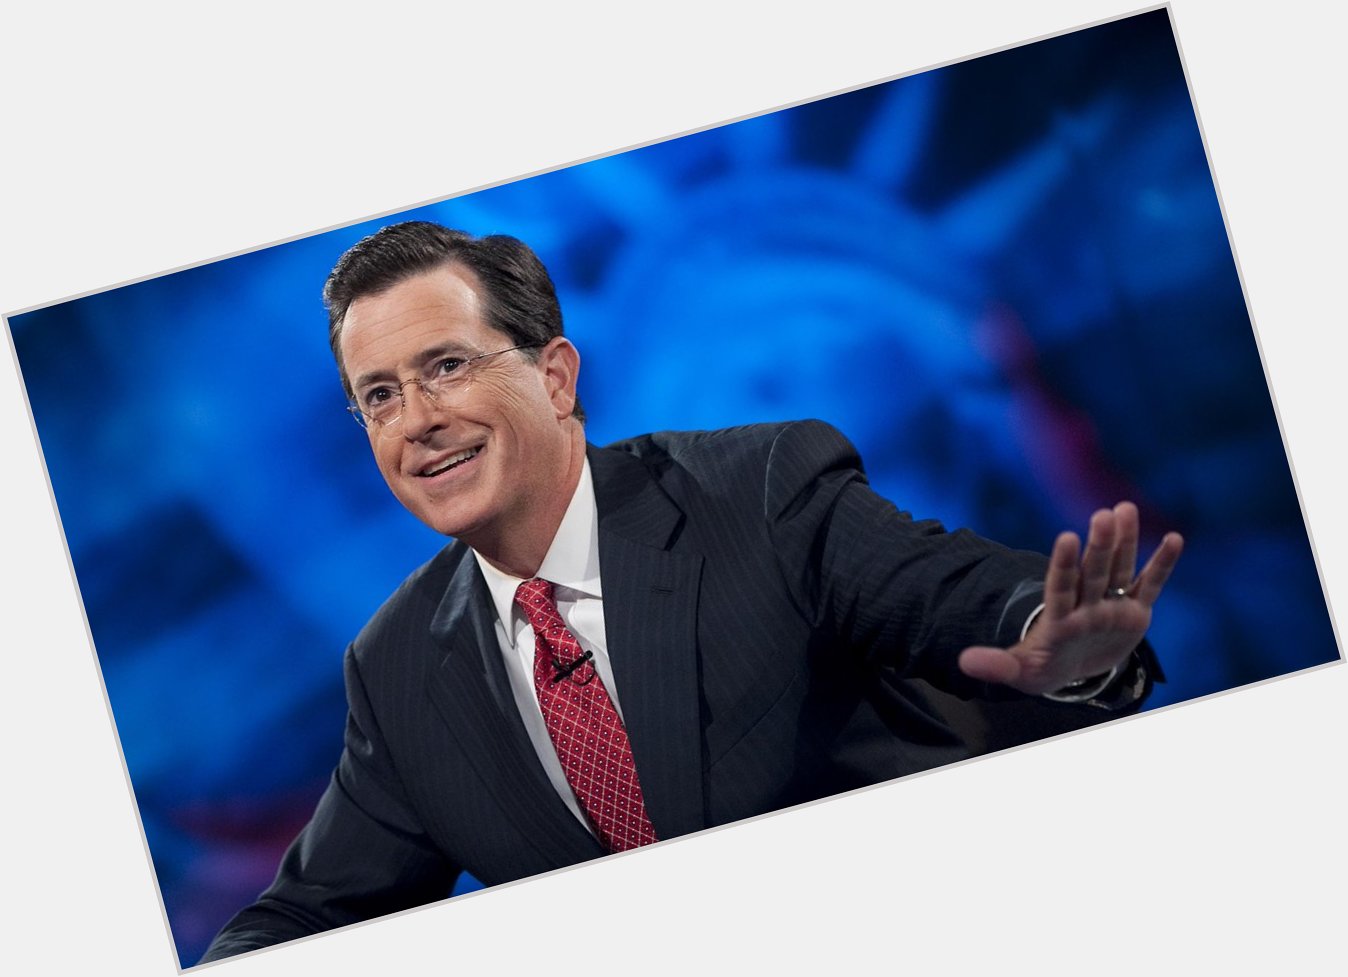 Happy Birthday to Stephen Colbert, who turns 51 today! 